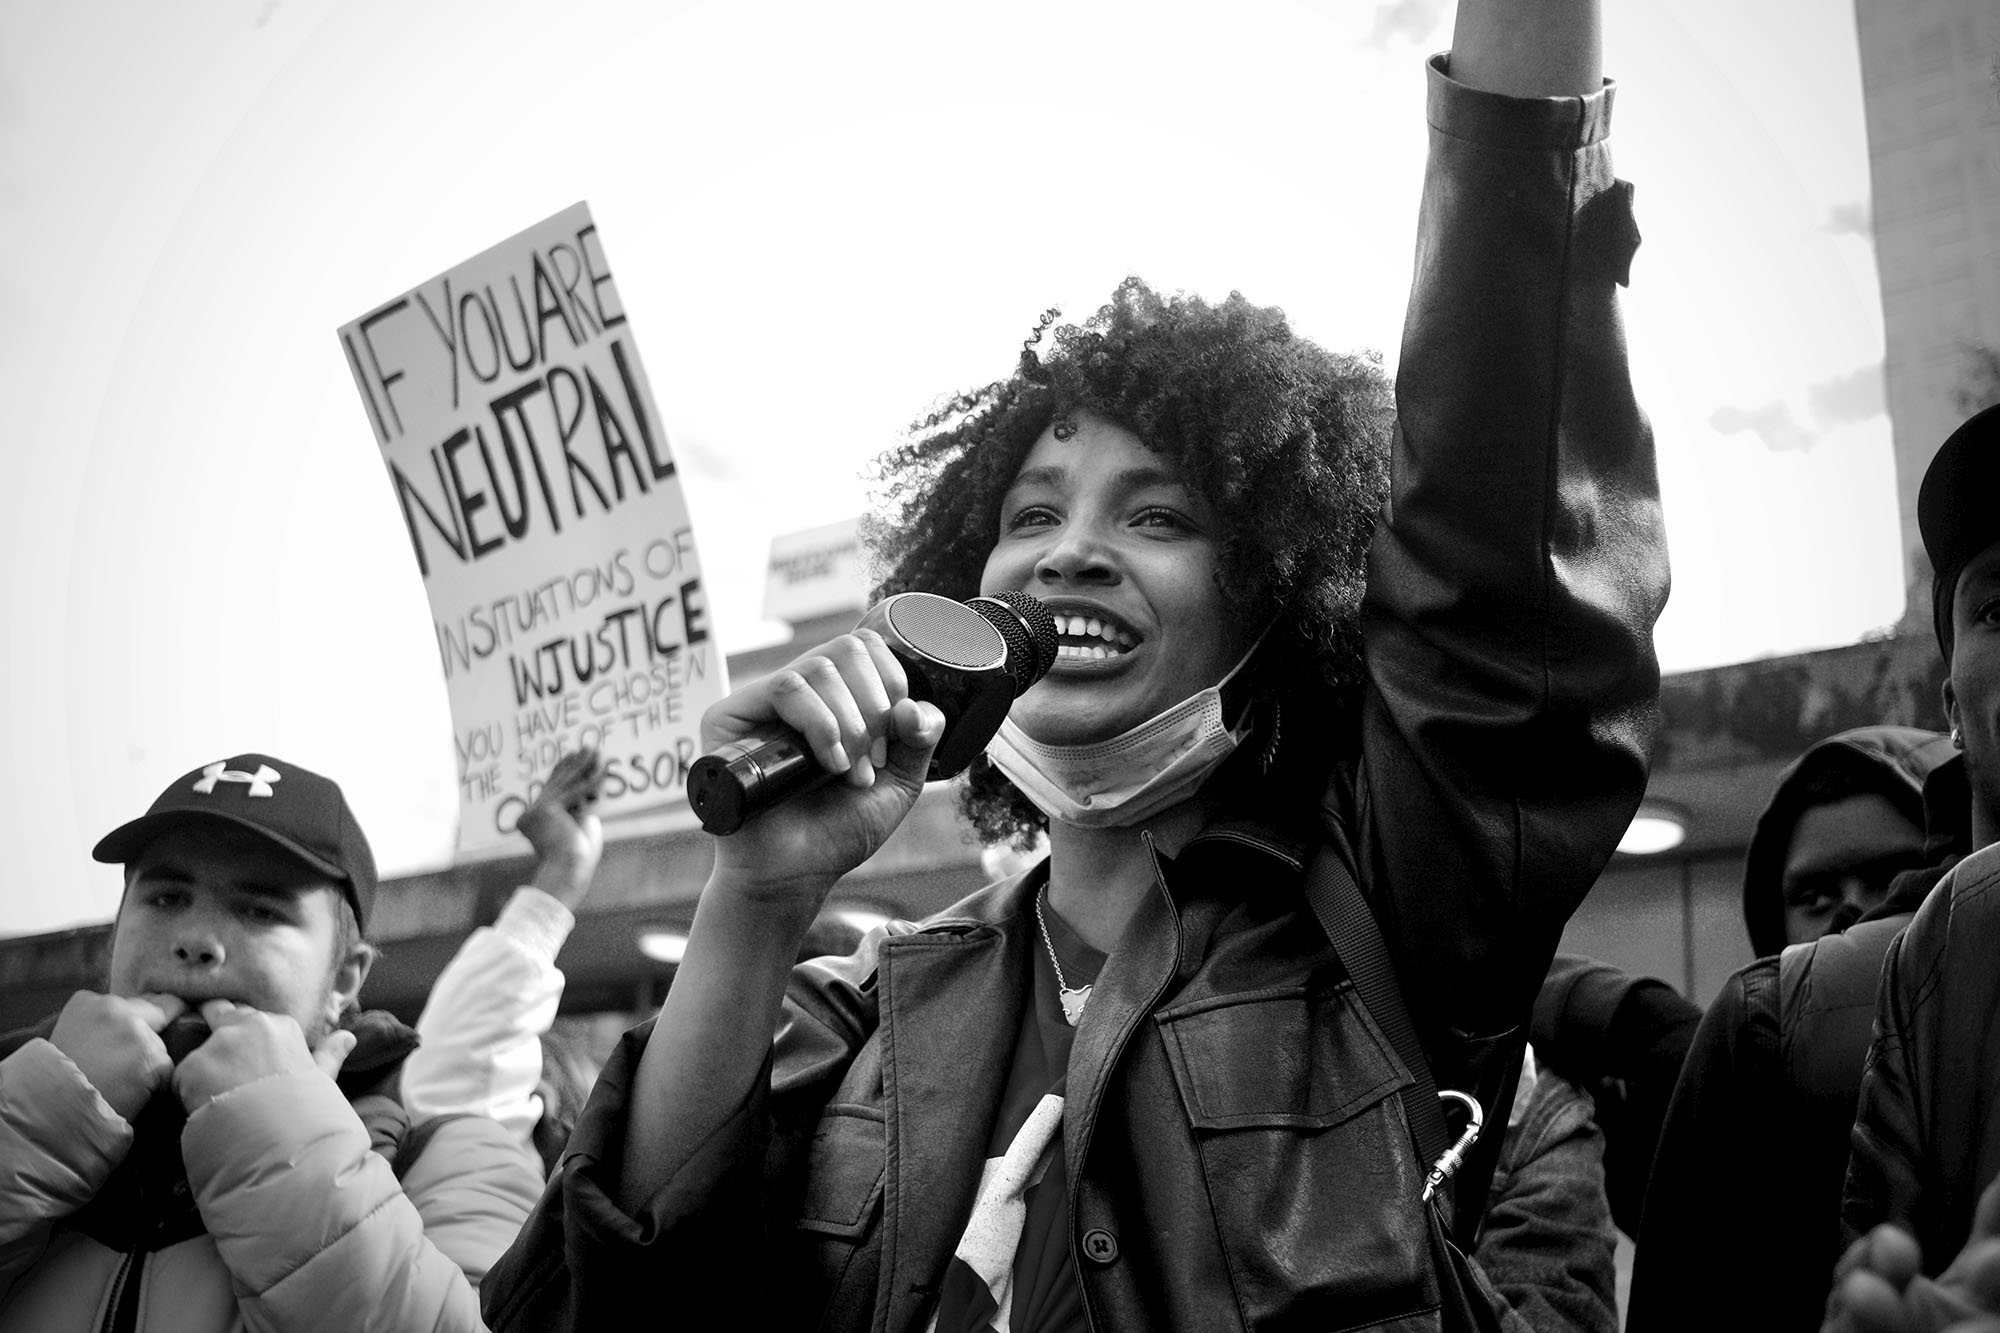 Greyscale photo of woman in black jacket holding microphone during a protest